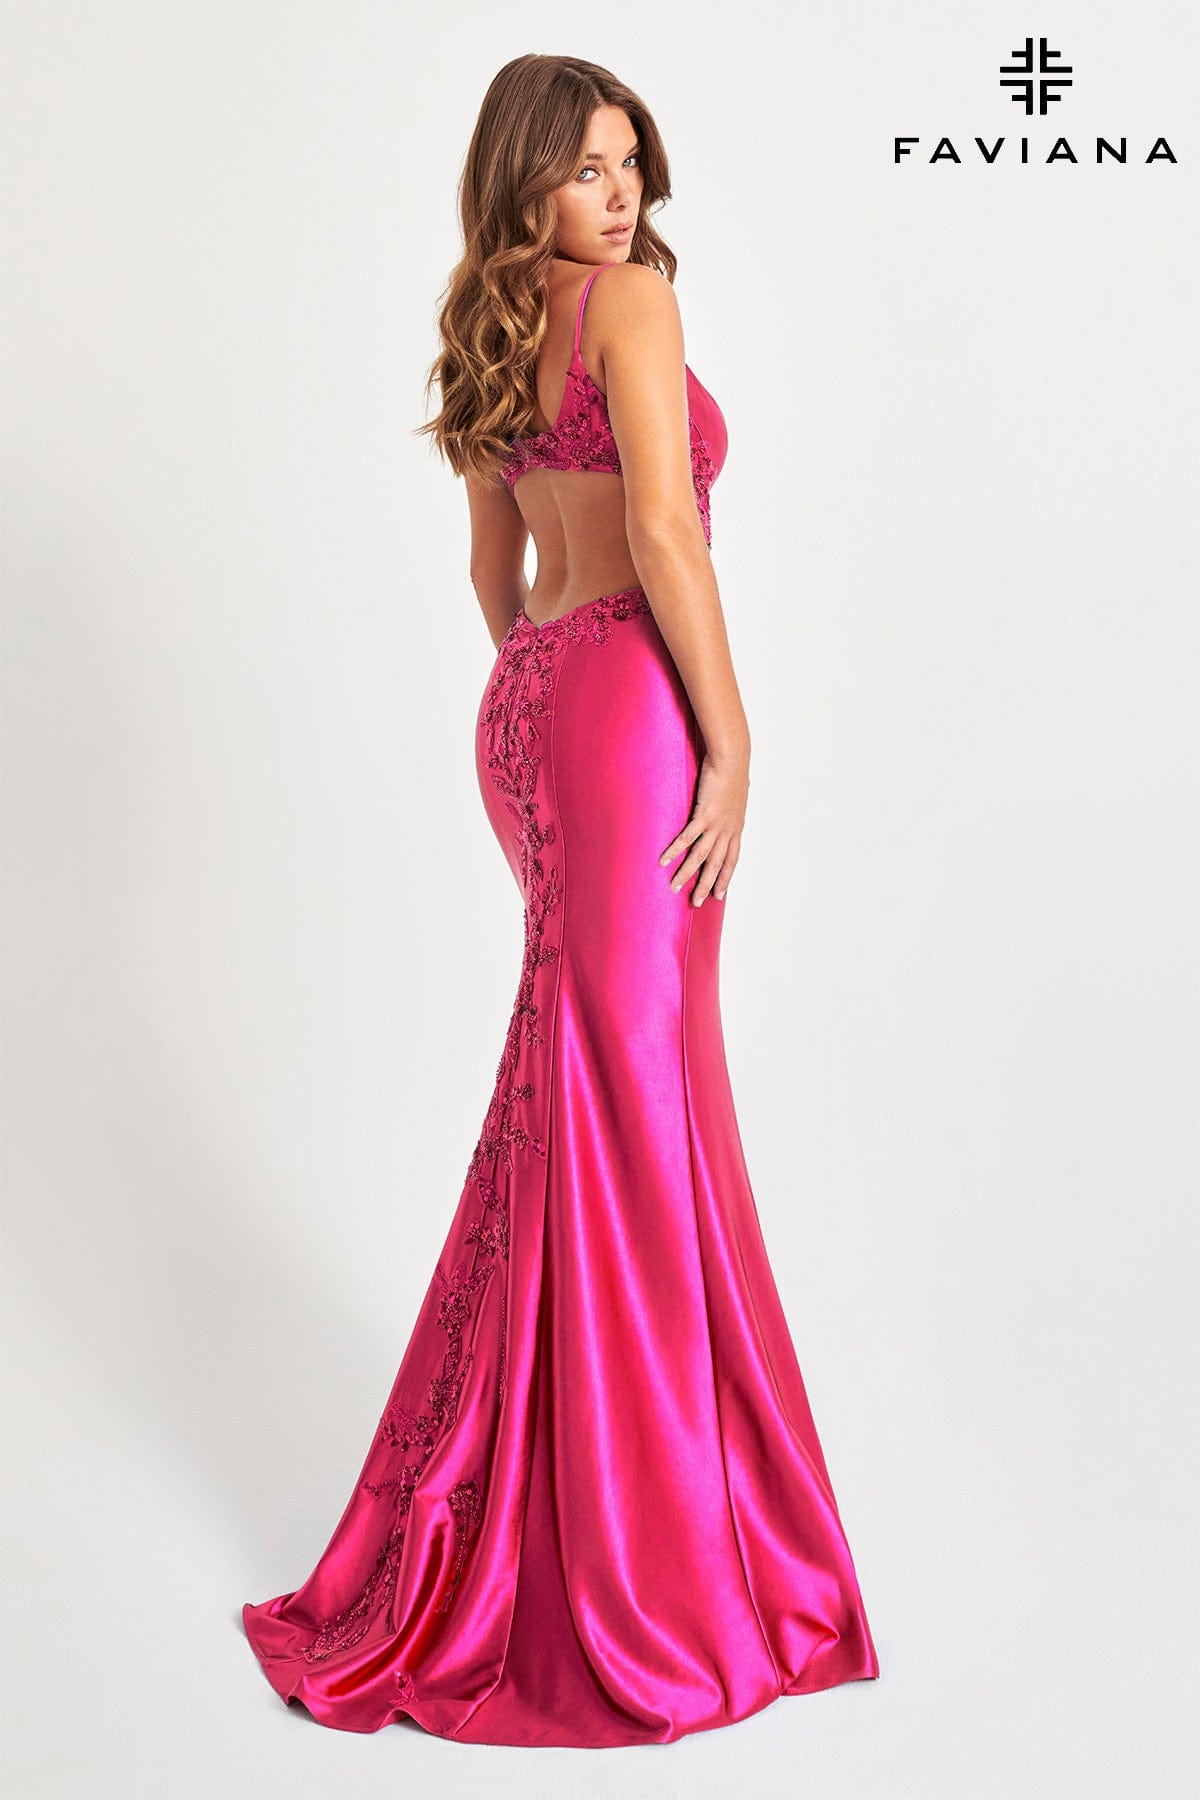 Shiny Satin Long Dress With Open Back And Beaded Lace Embellishment | 11007